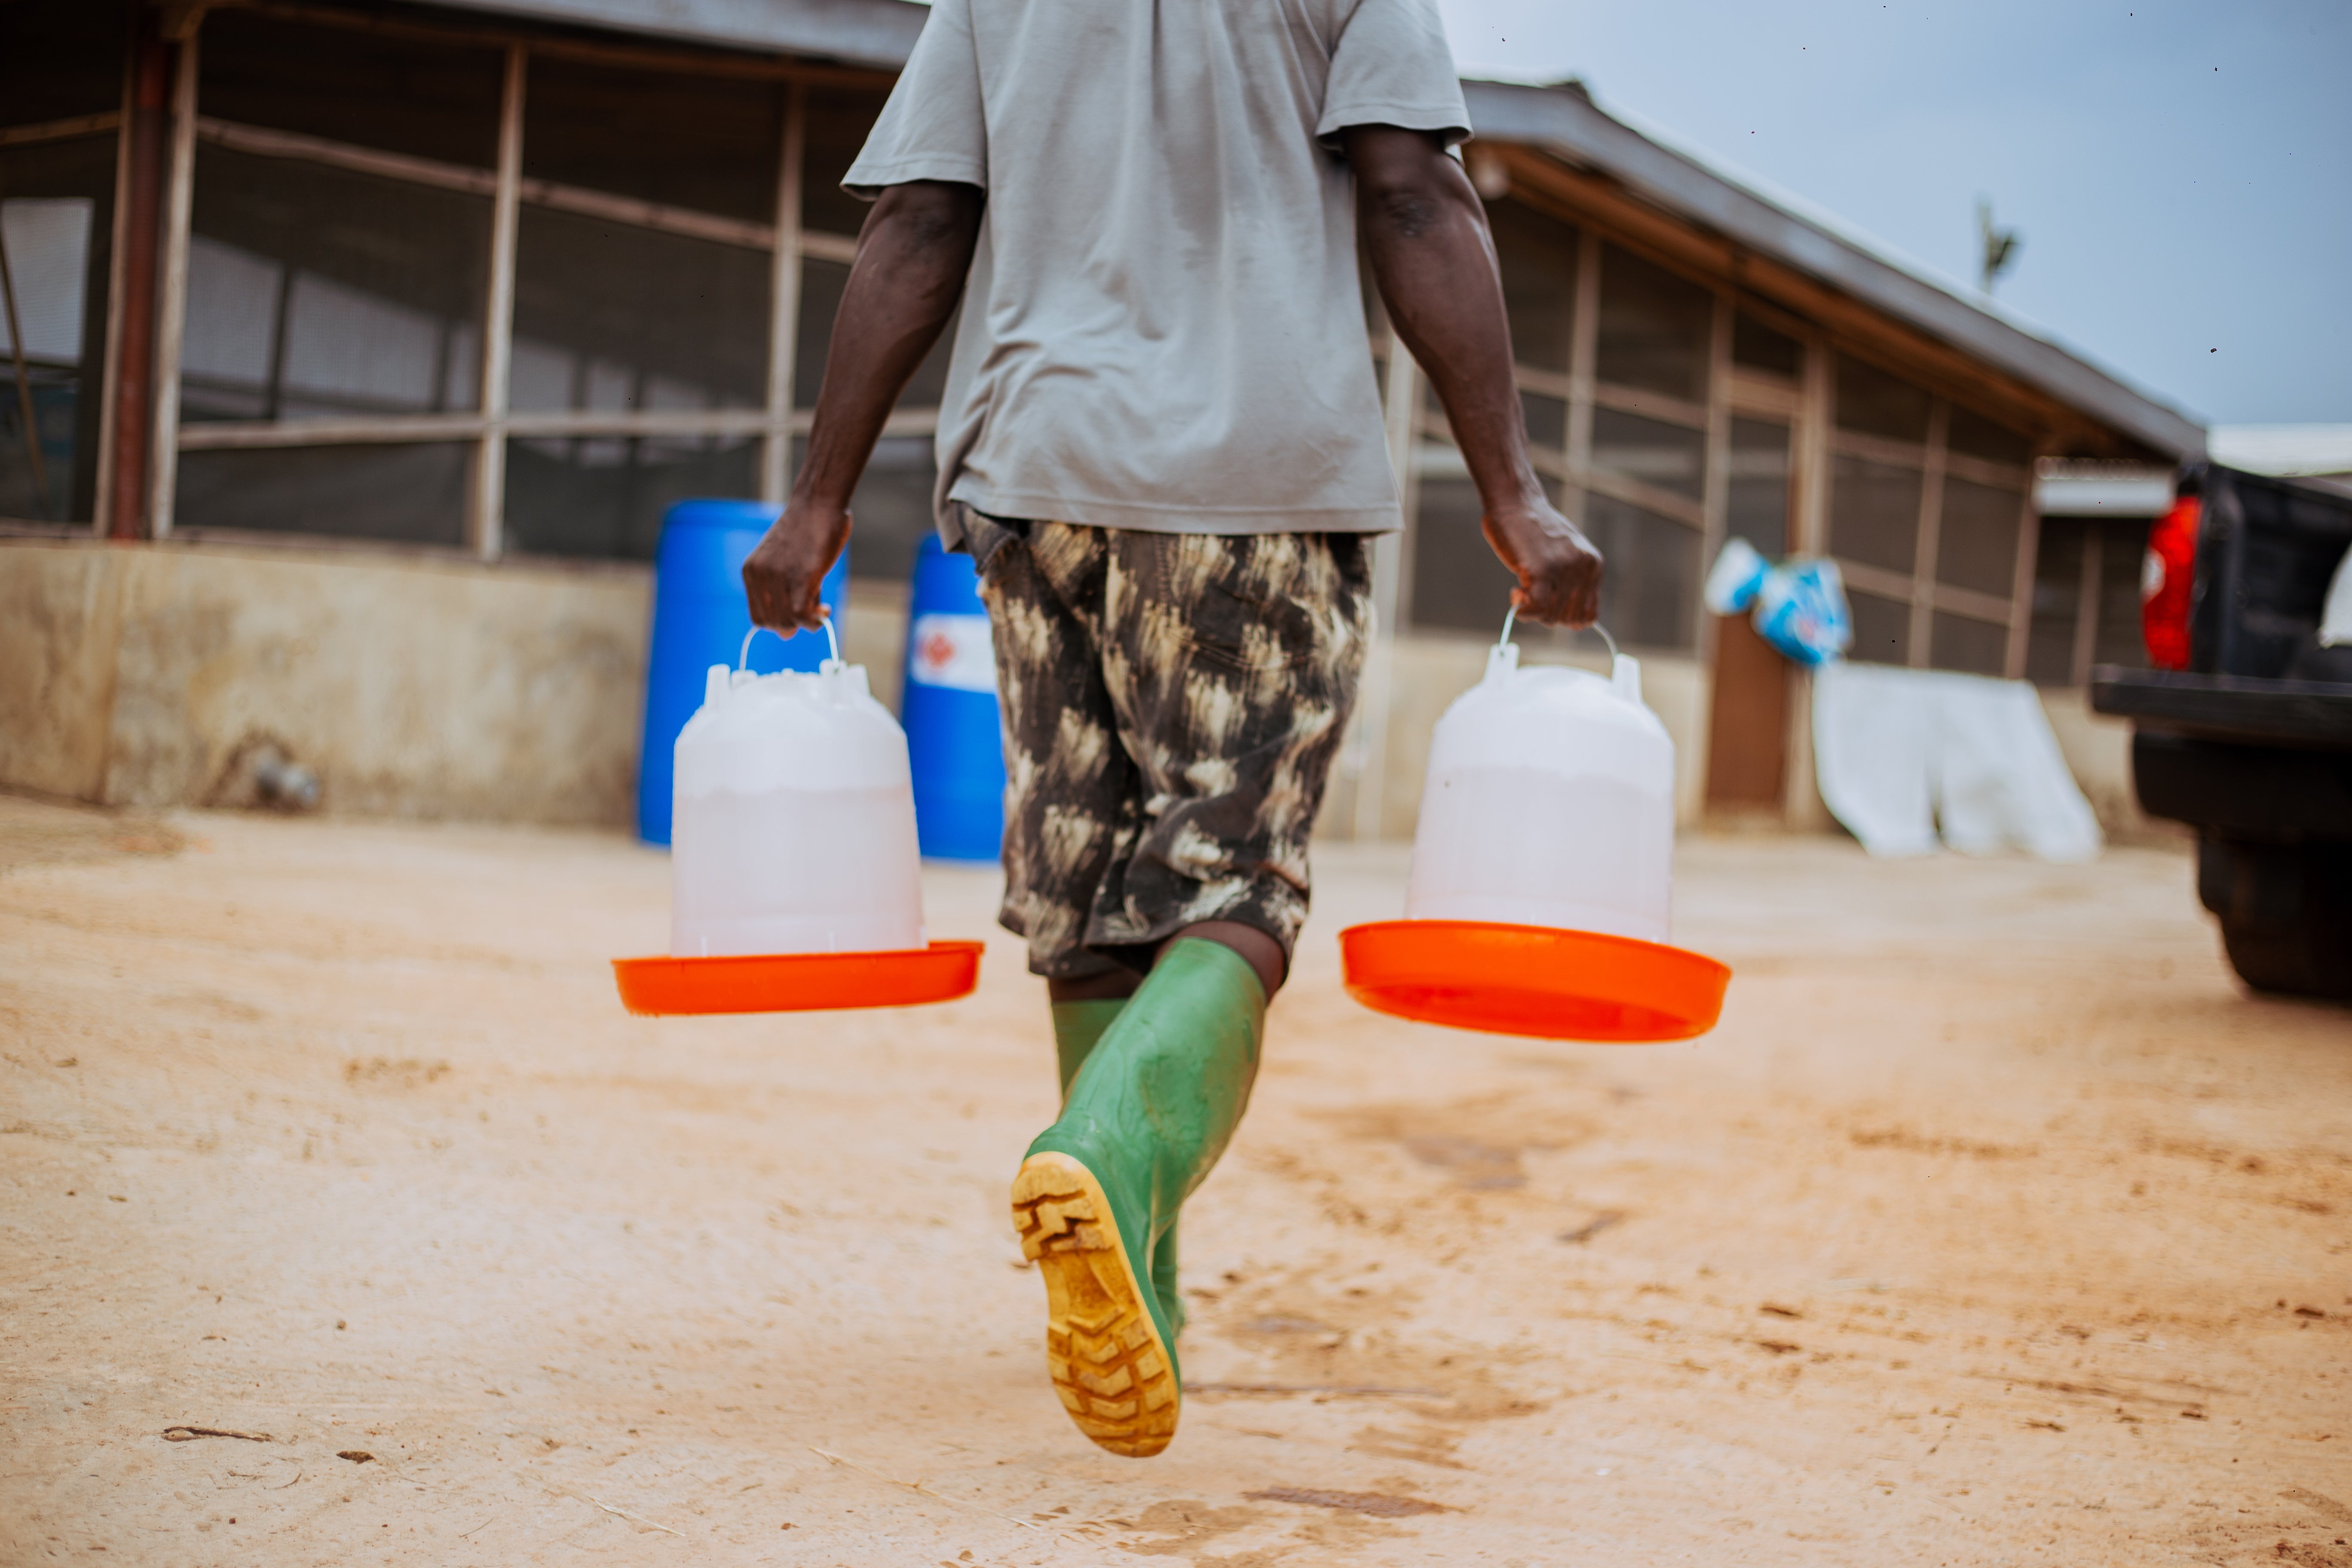 Man with green boots and water containers on a deserted dirt road.